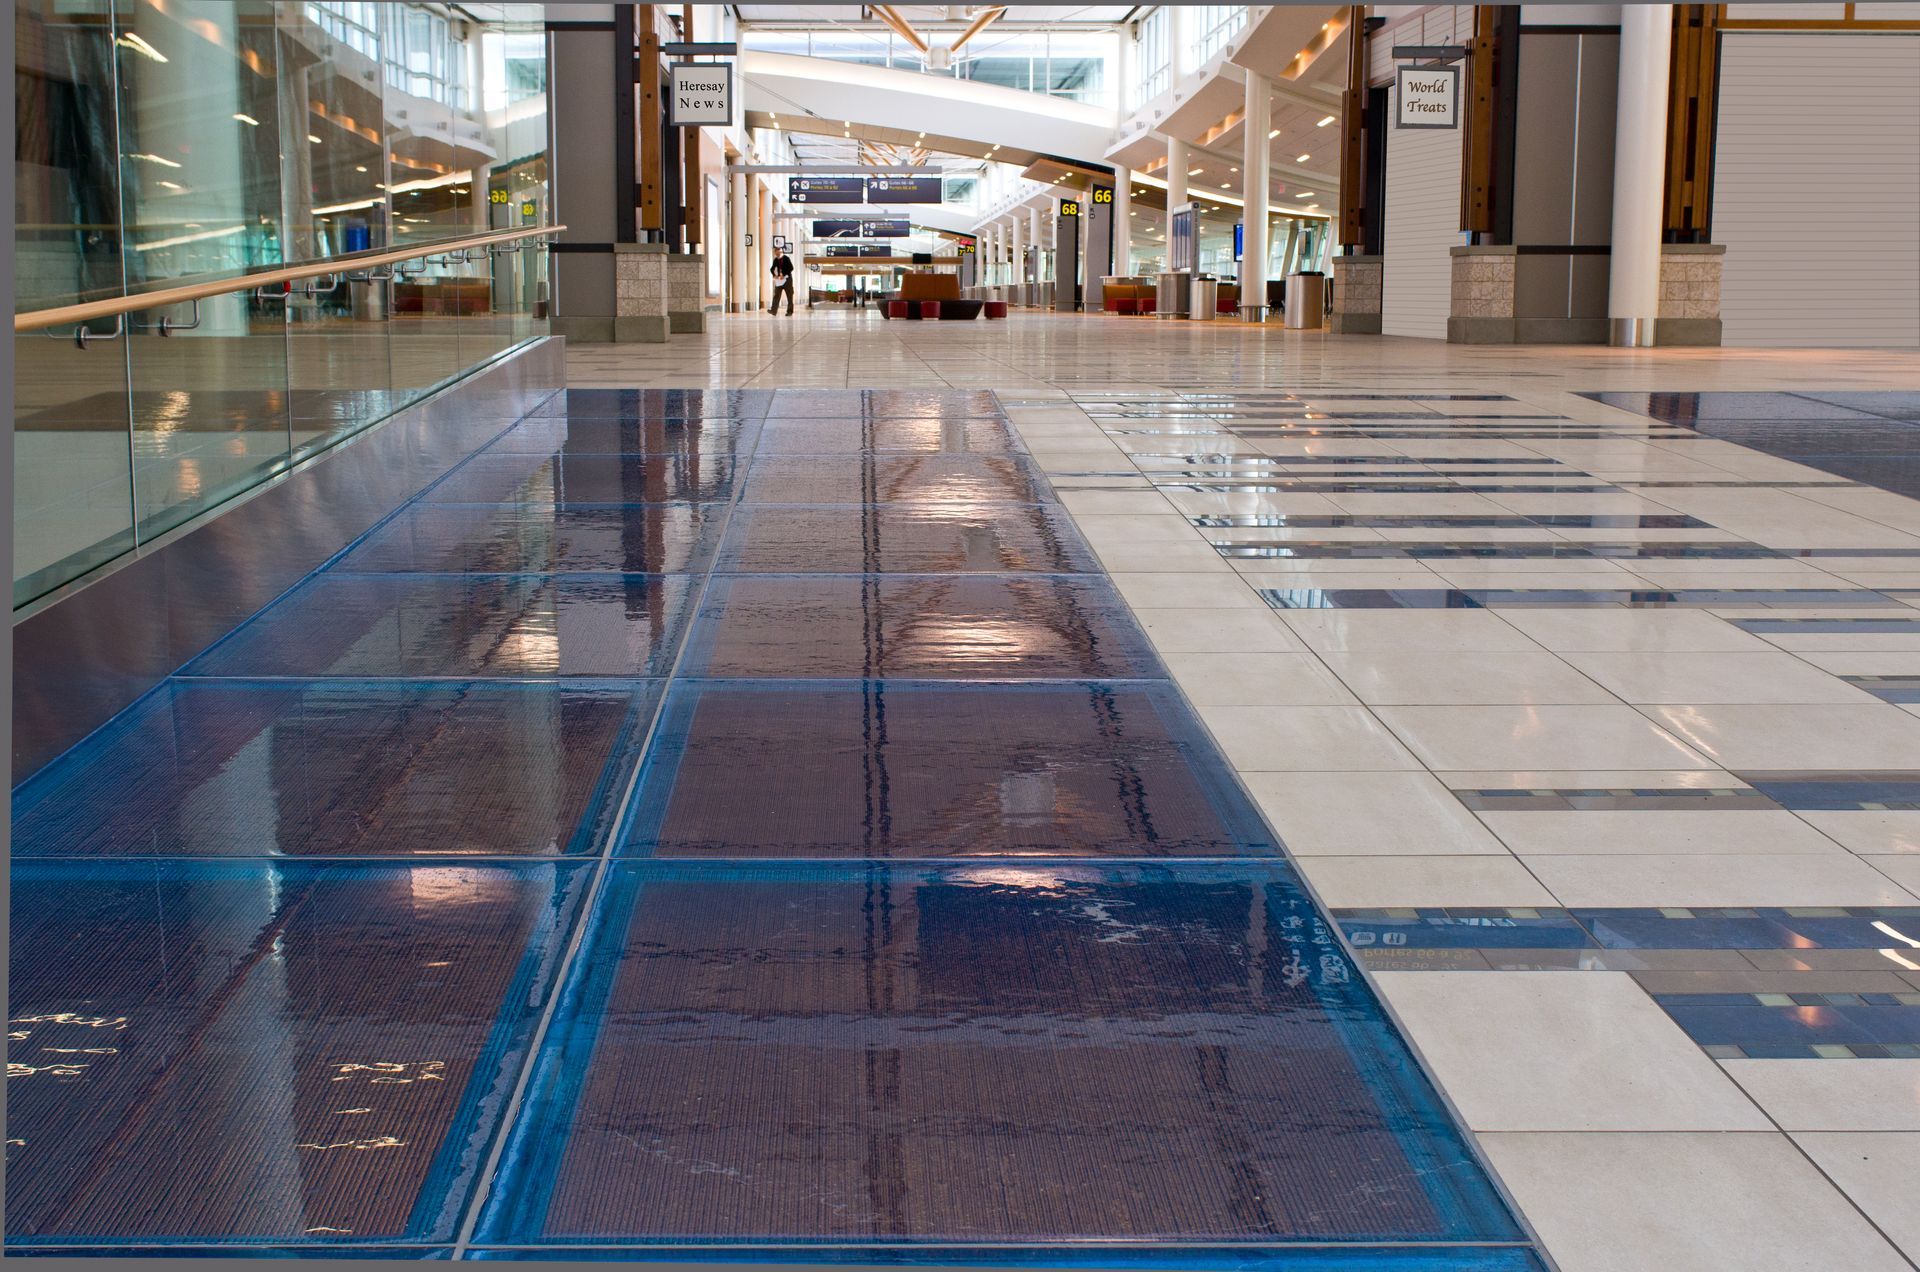 Glass flooring in an airport.